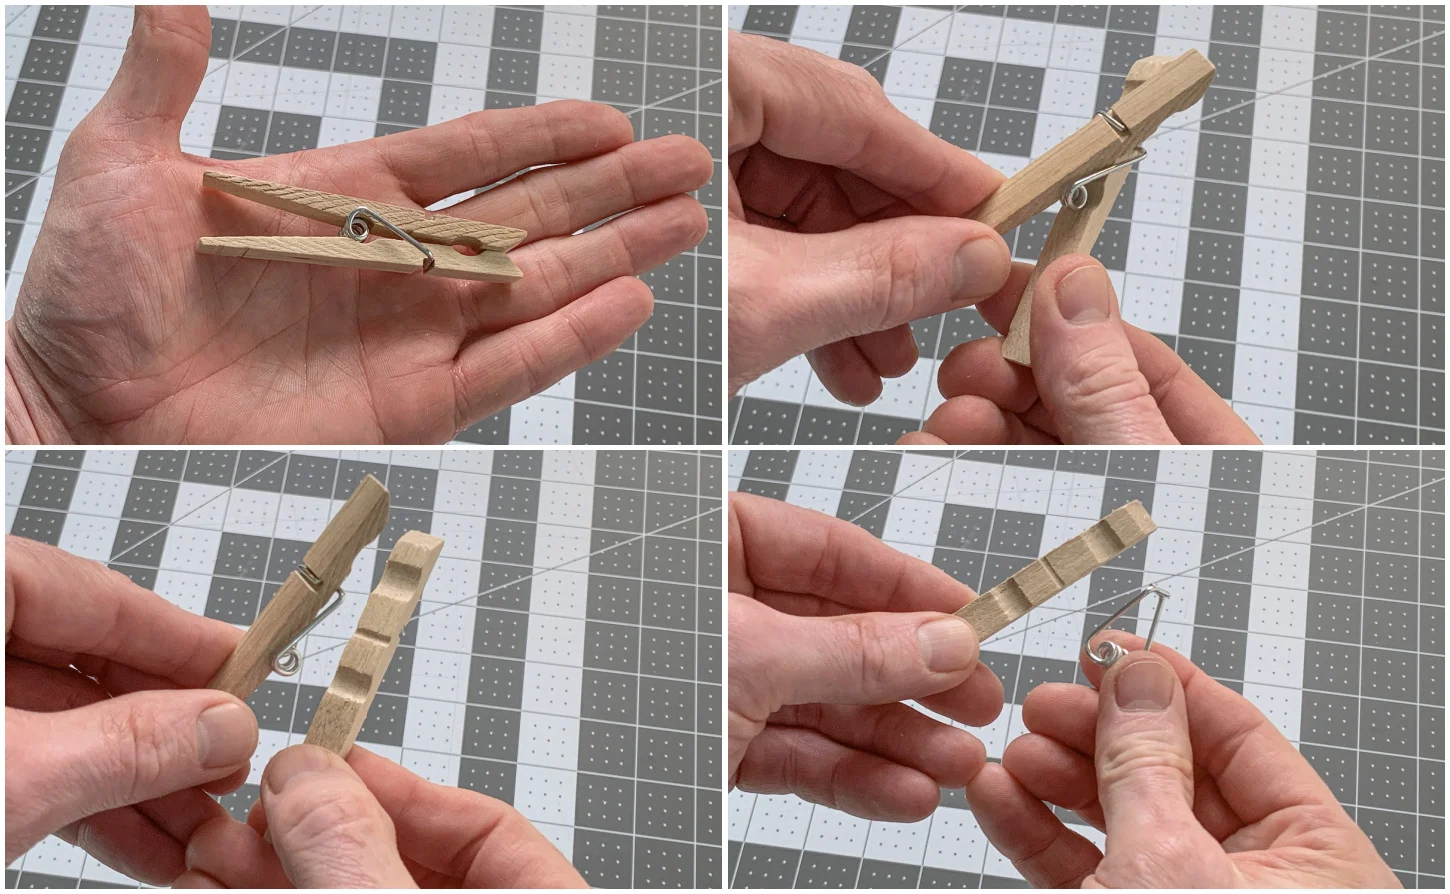 Disassembling a clothespin and removing the spring